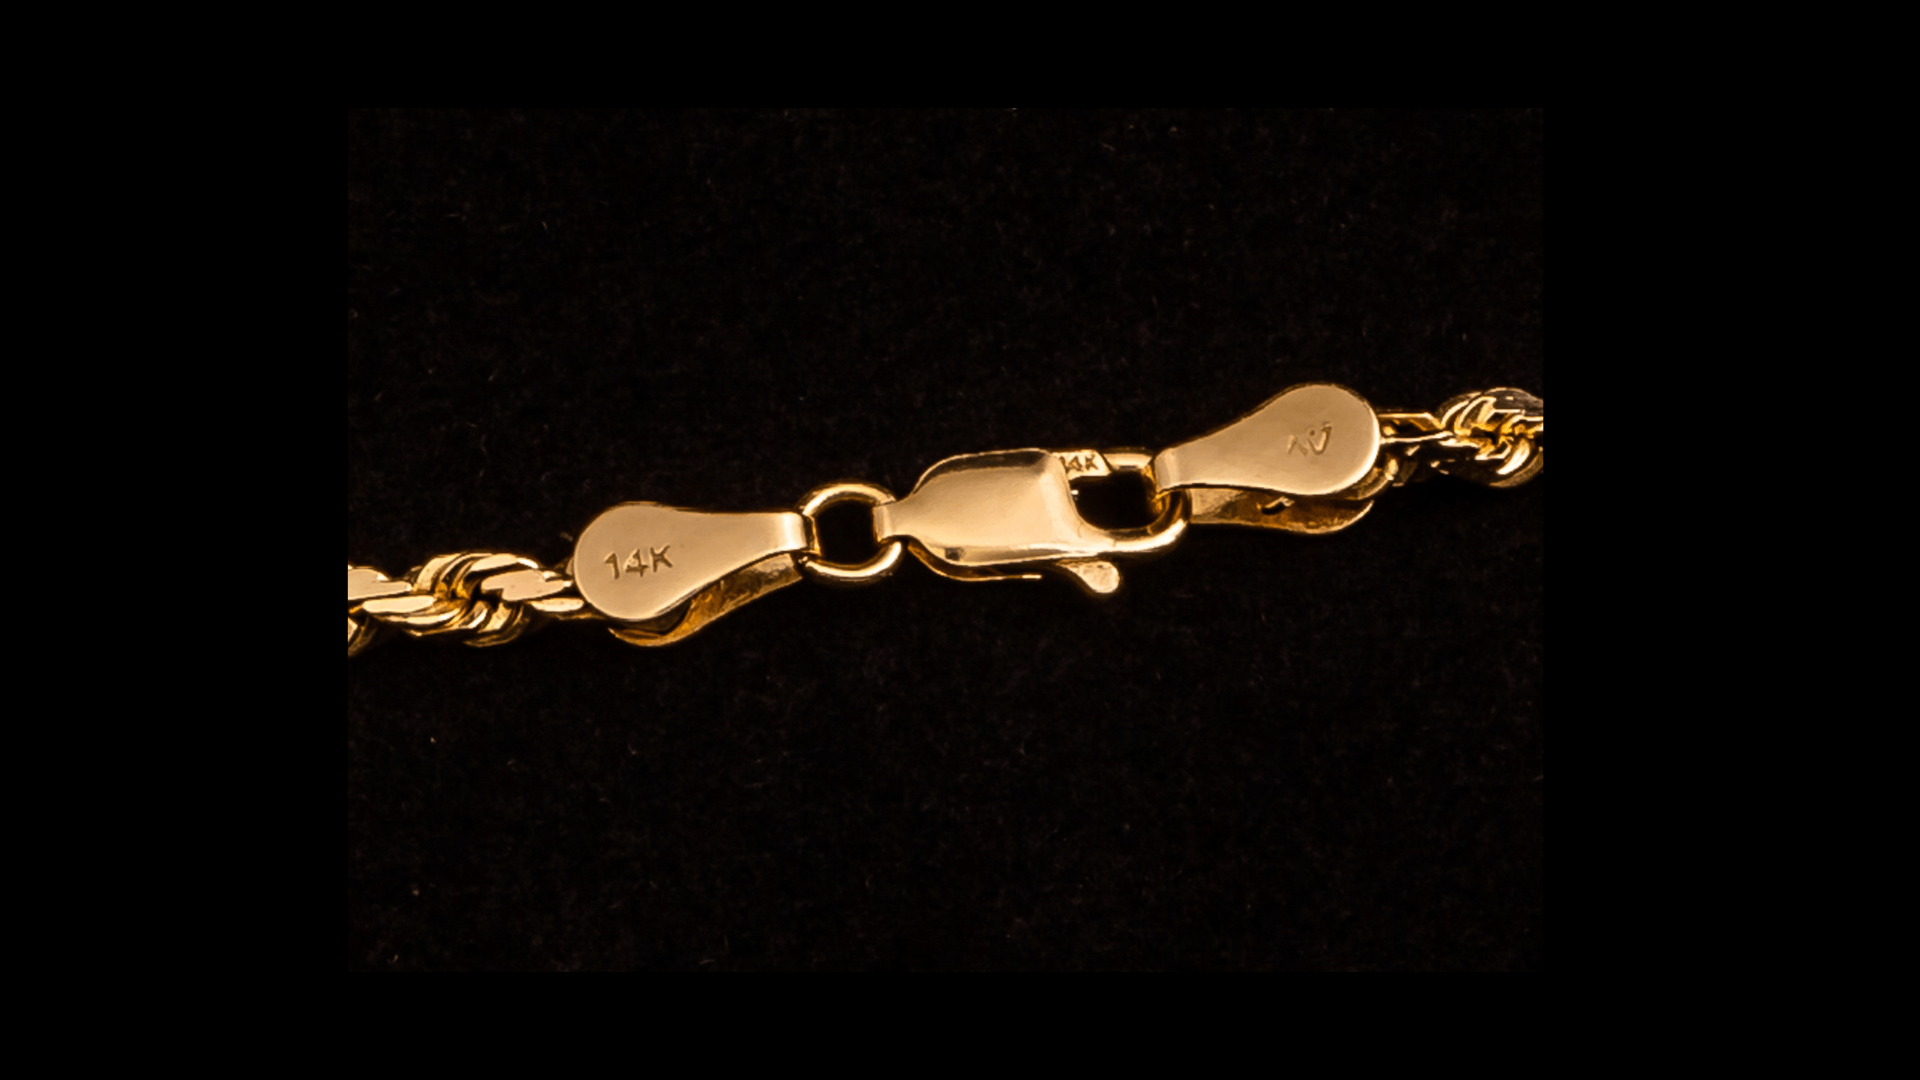 A close up of a gold chain on a black background